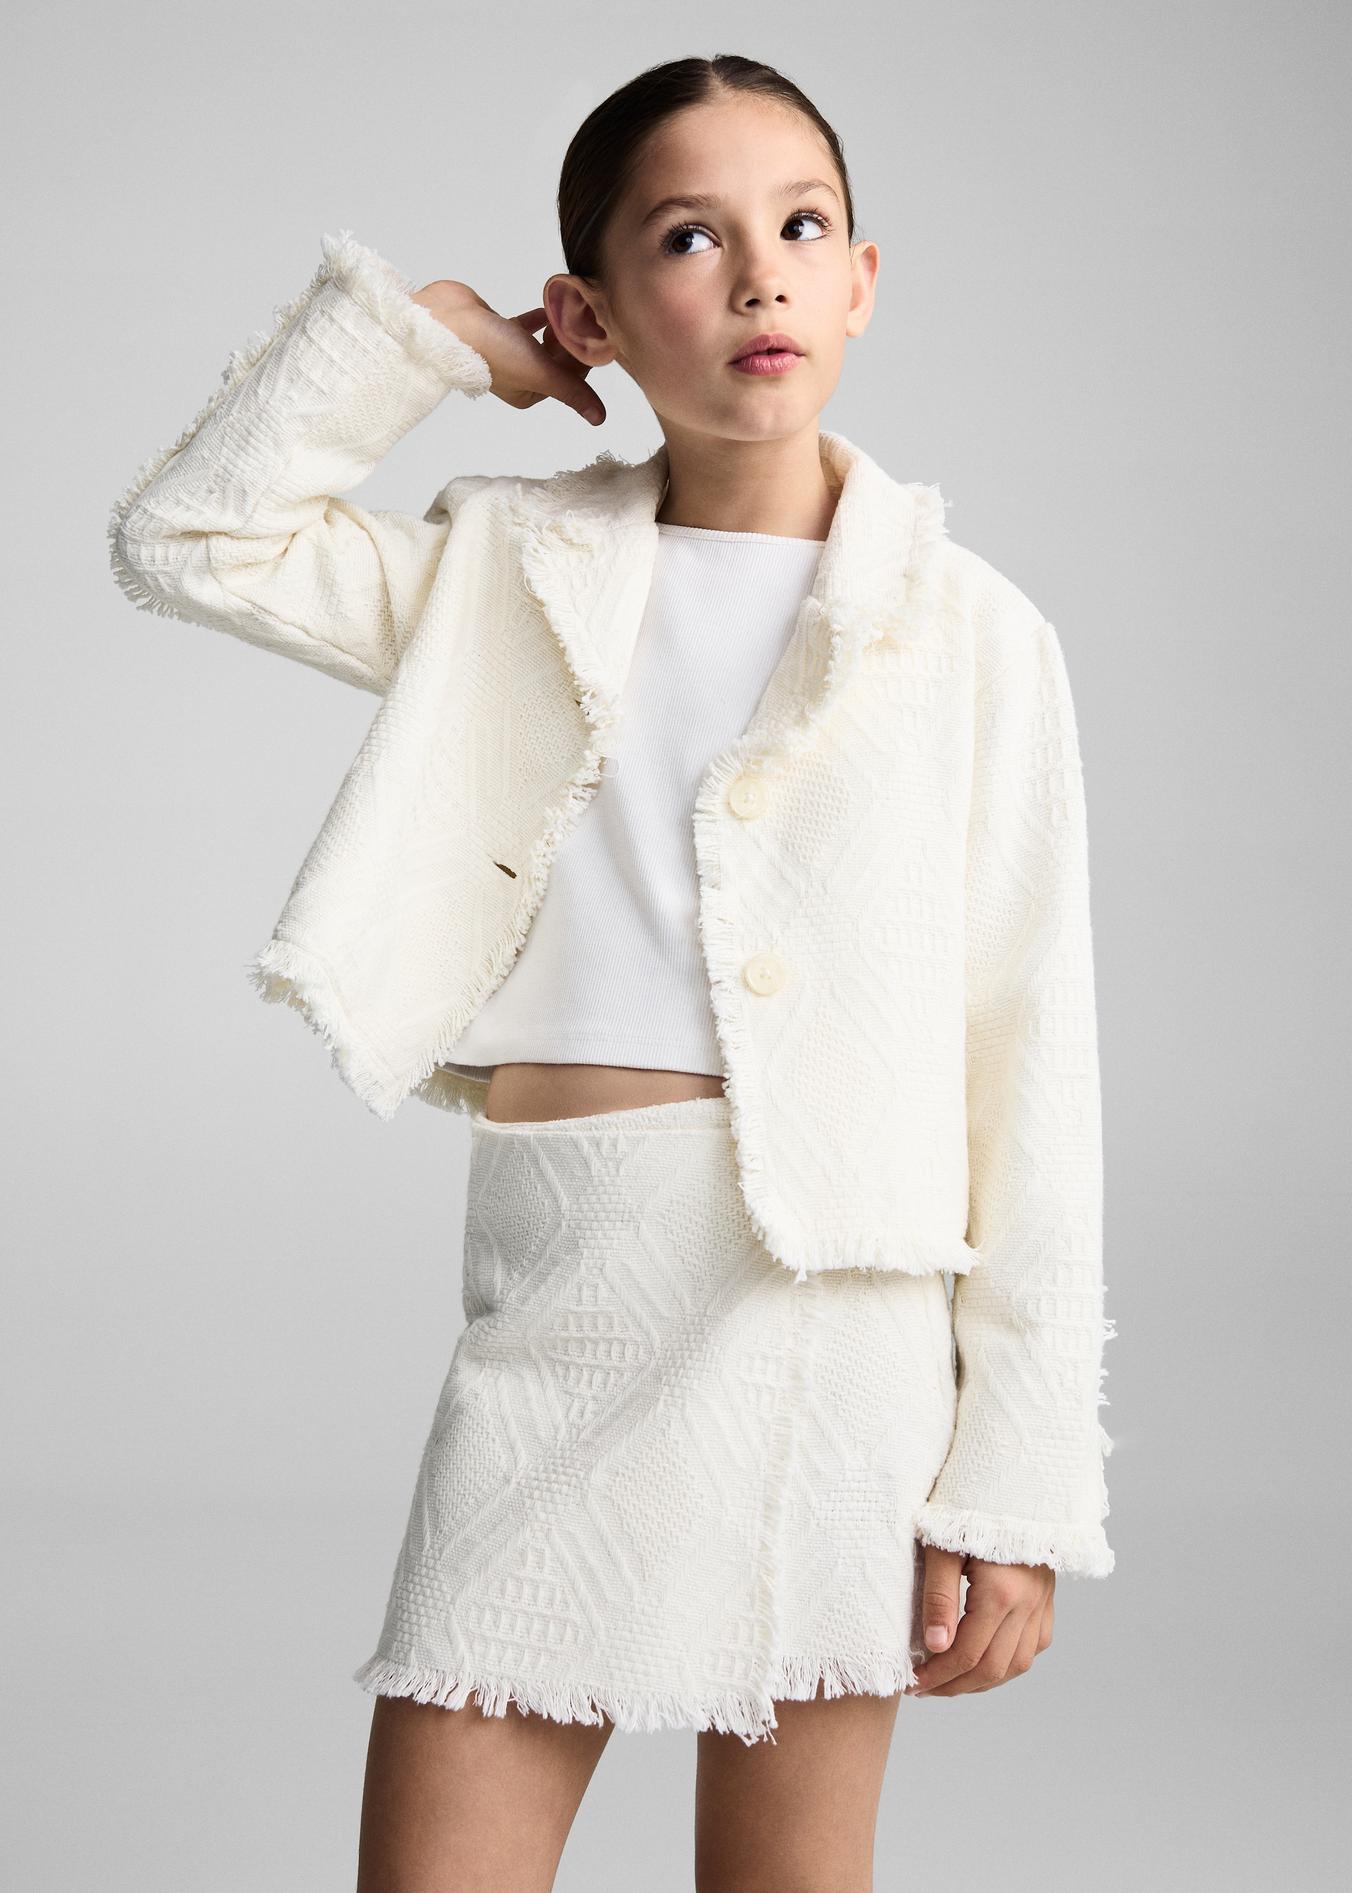 Fringed textured jacket offers at S$ 39.9 in Mango Kids